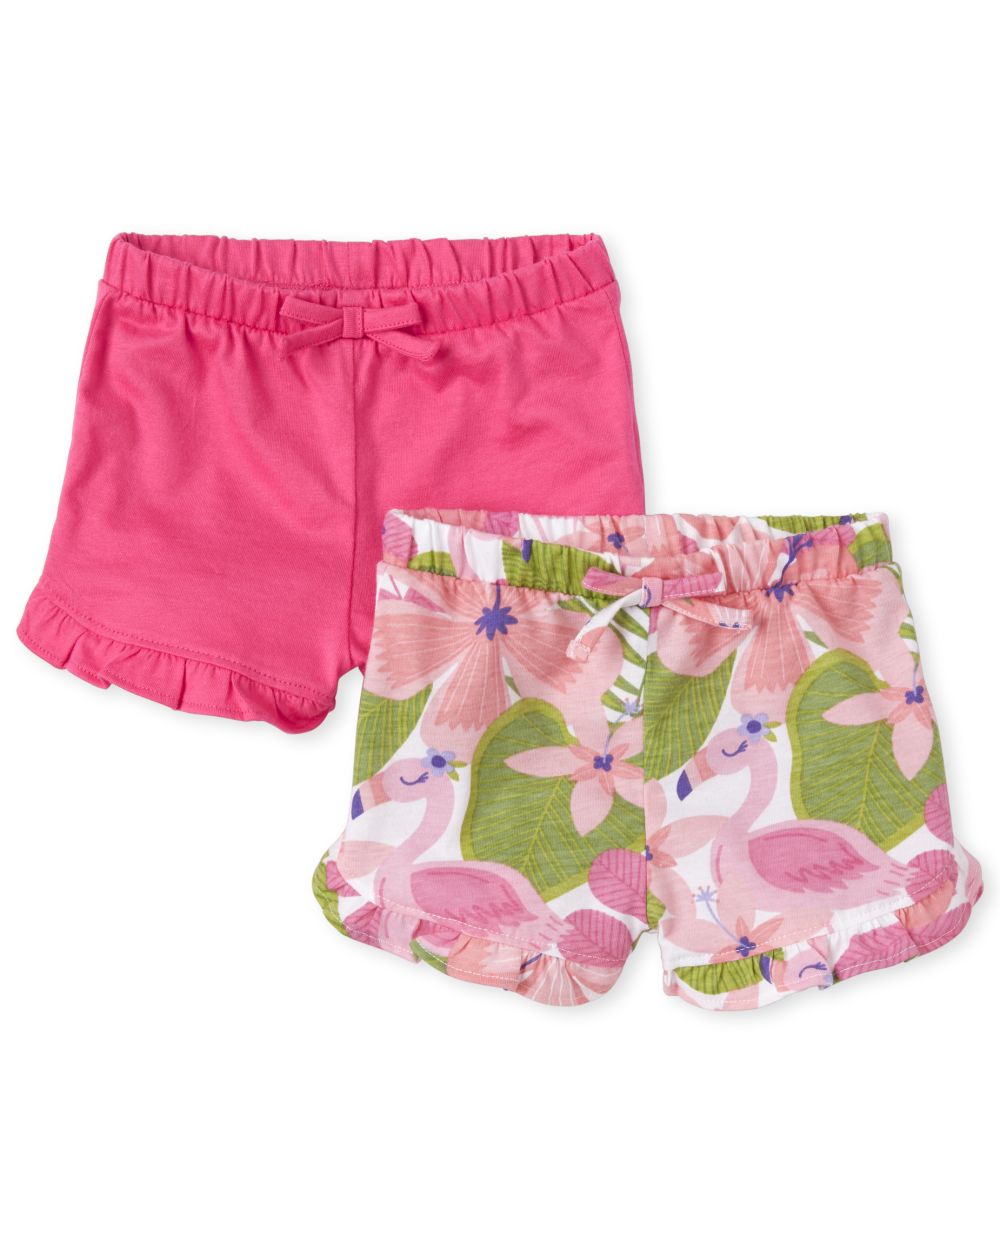 Baby Girls Flamingo Print And Solid Knit Ruffle Shorts 2-Pack